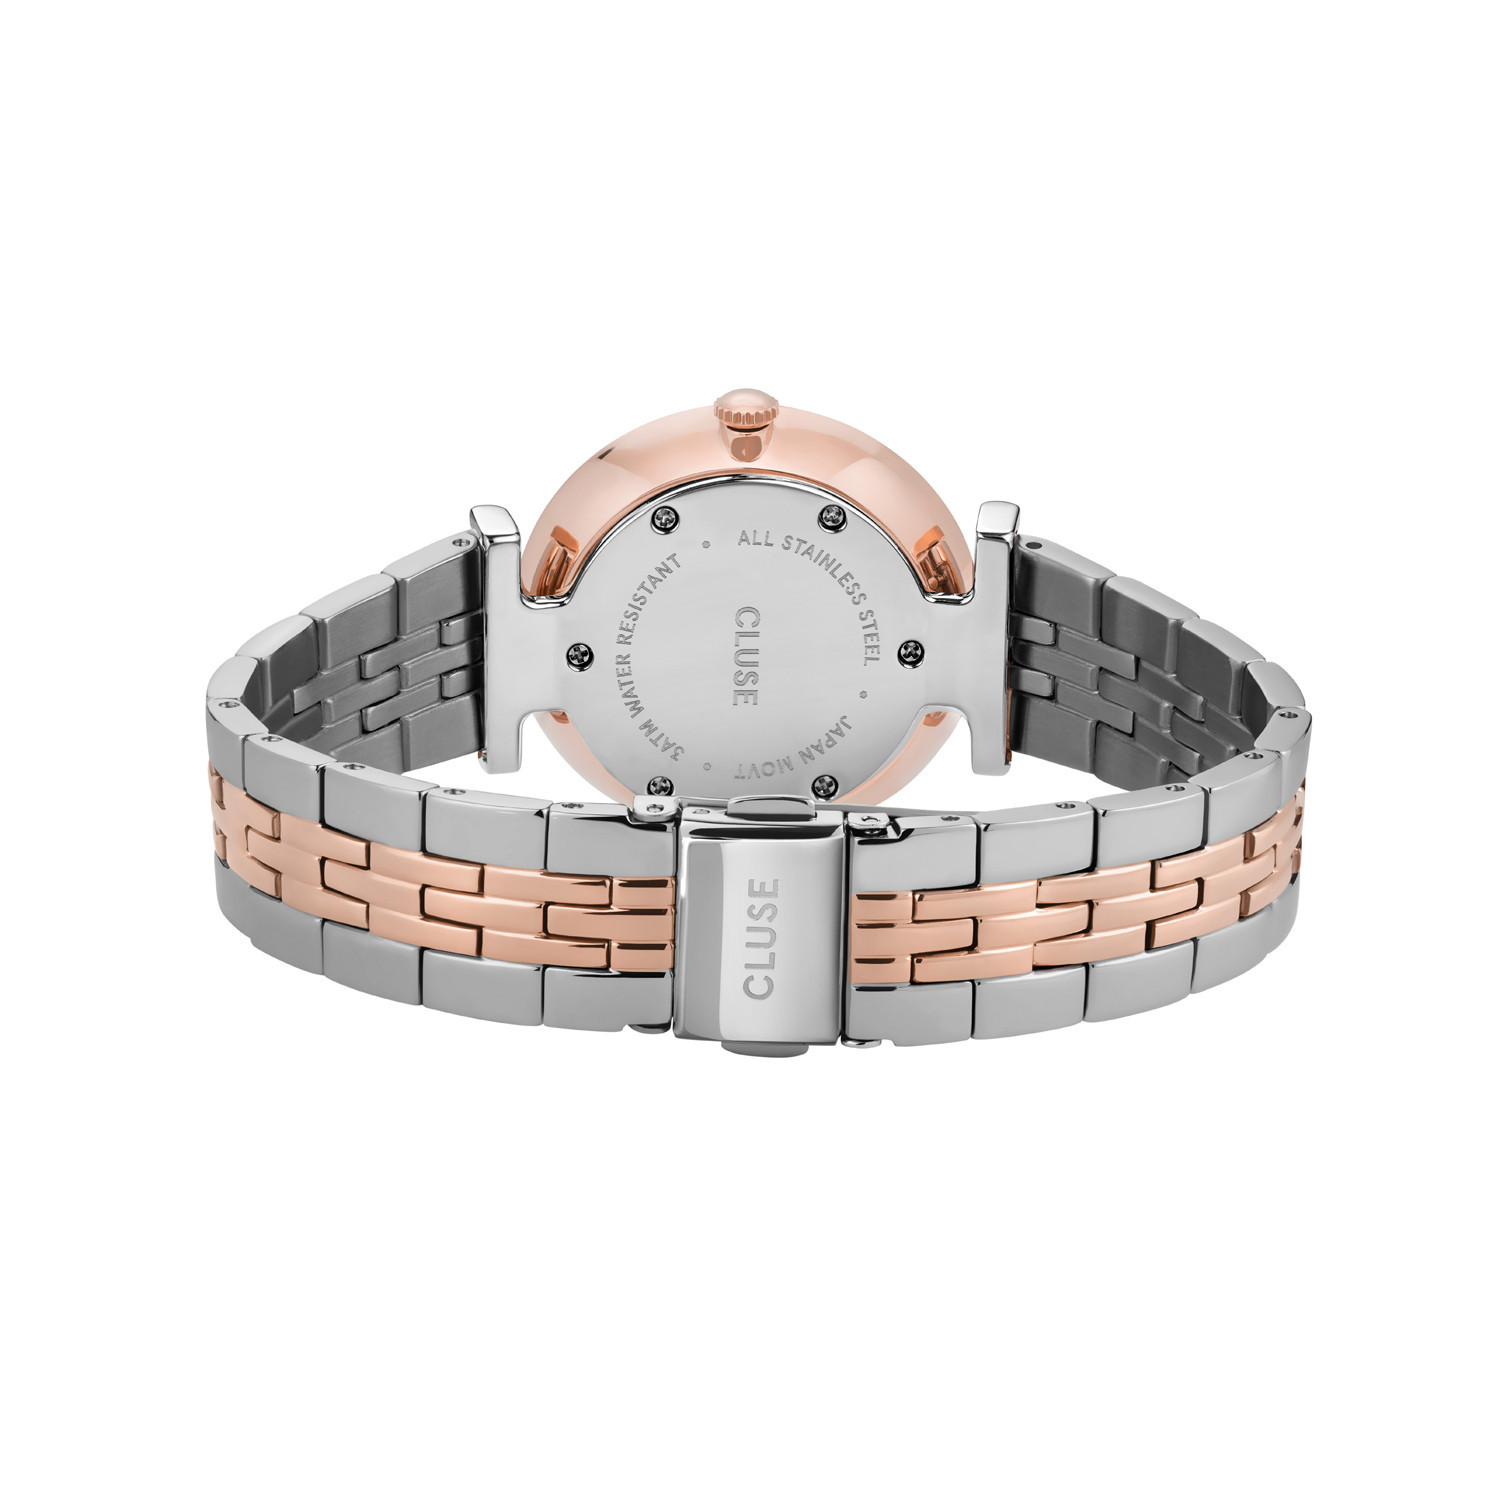 Montre femme Cluse Triomphe rose gold white pearl/
silver rose gold